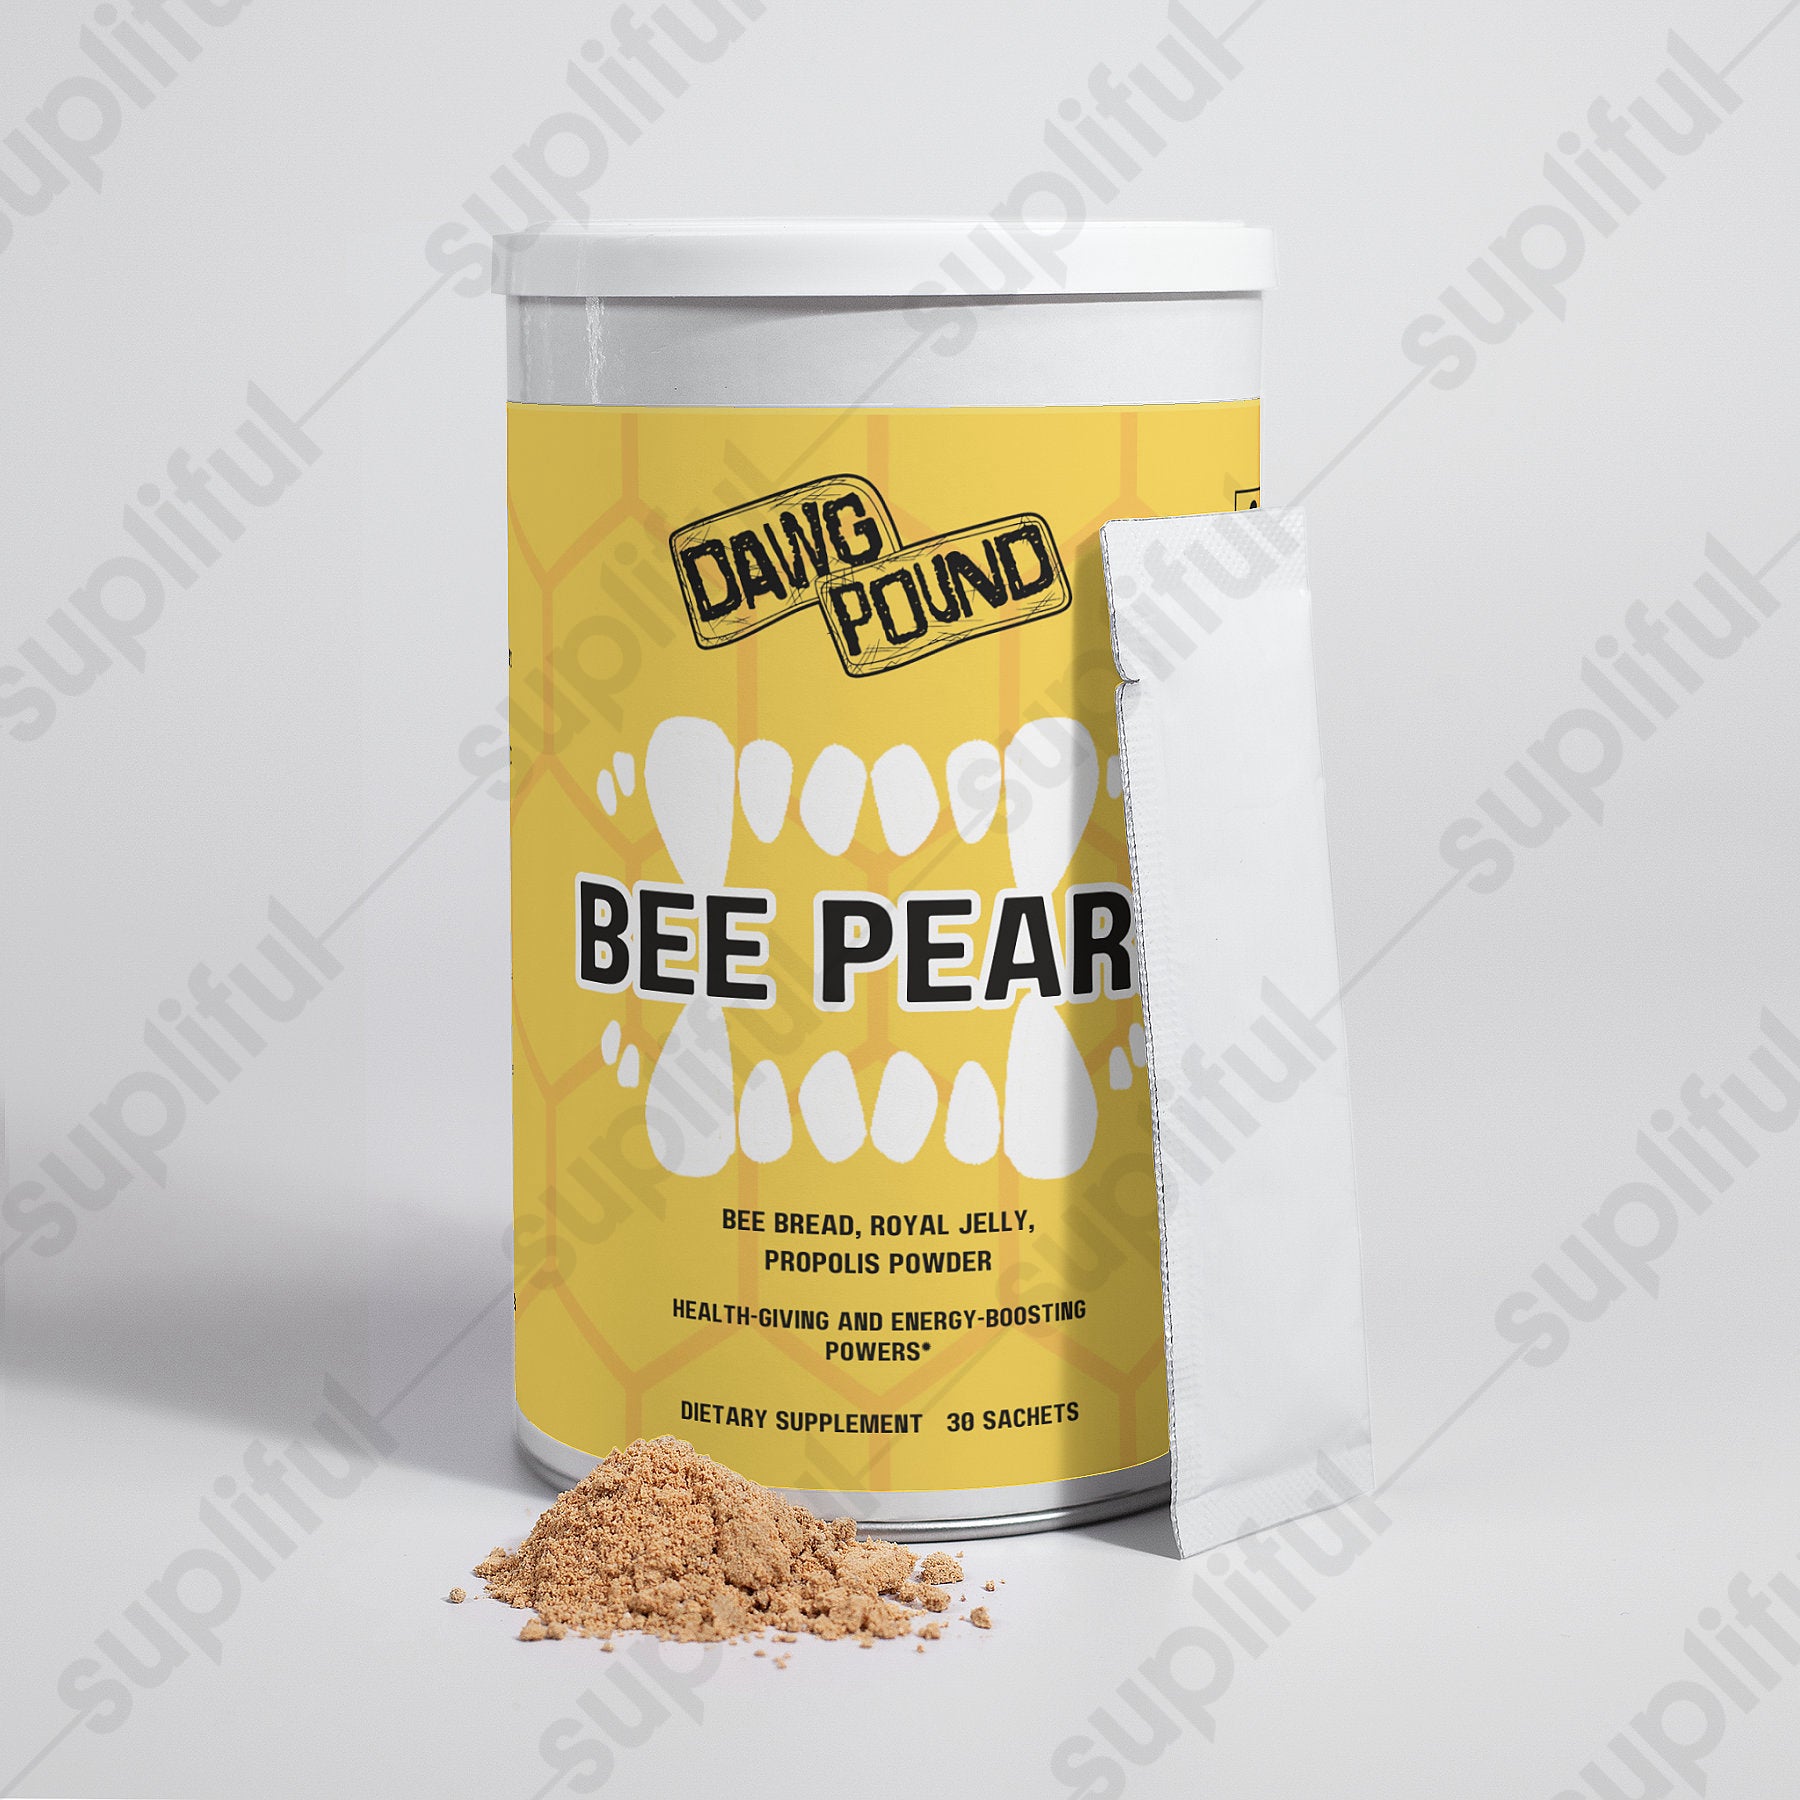 Dawg Pound Bee Pearl Powder - Front View With Sachet and Powder in Front